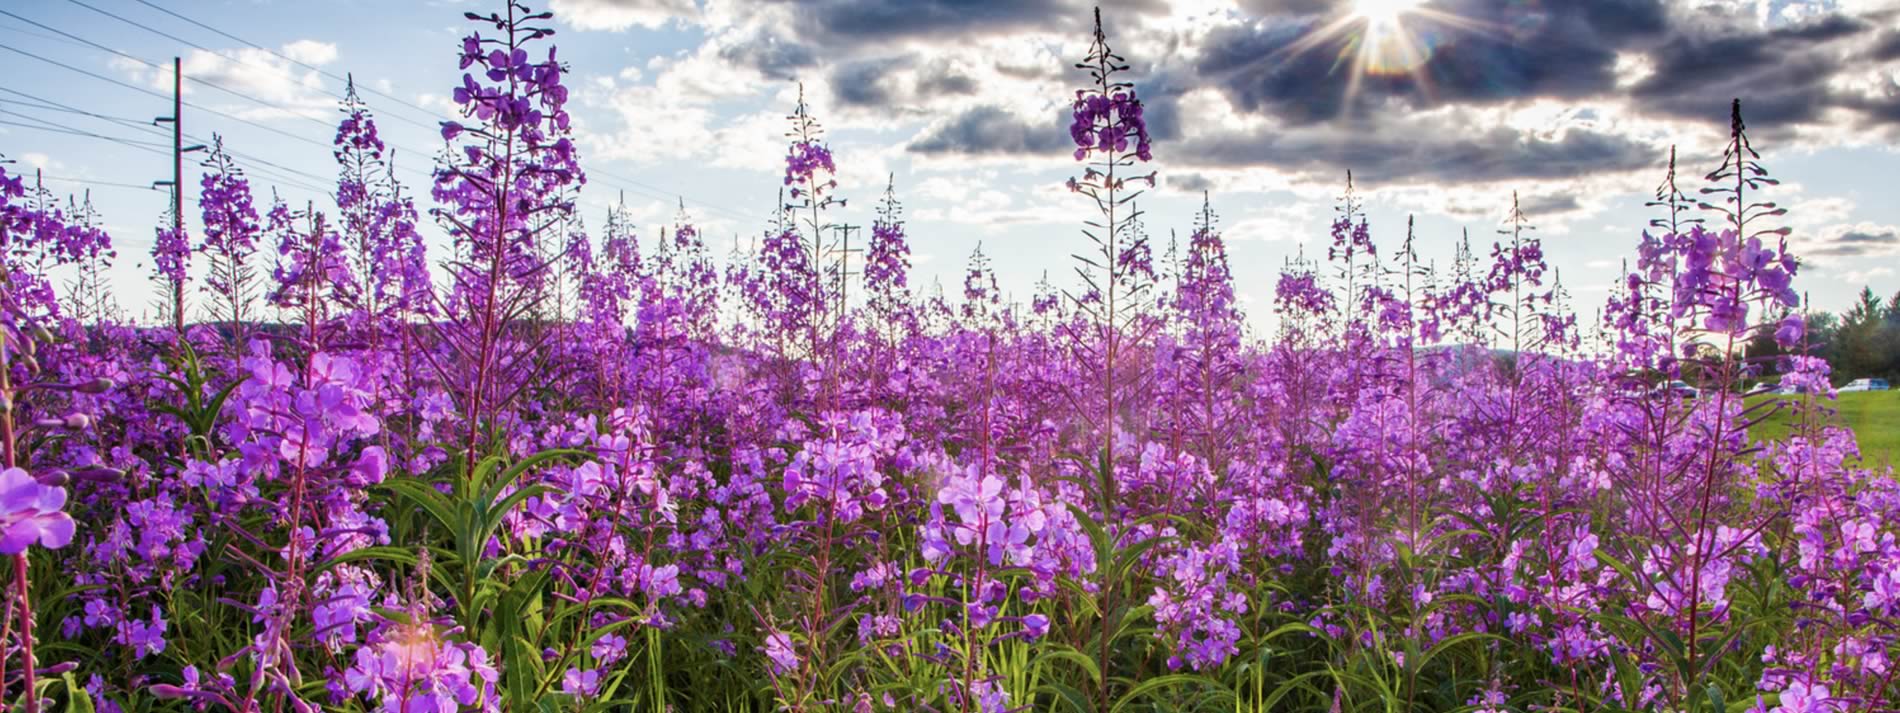 Fireweed in a field